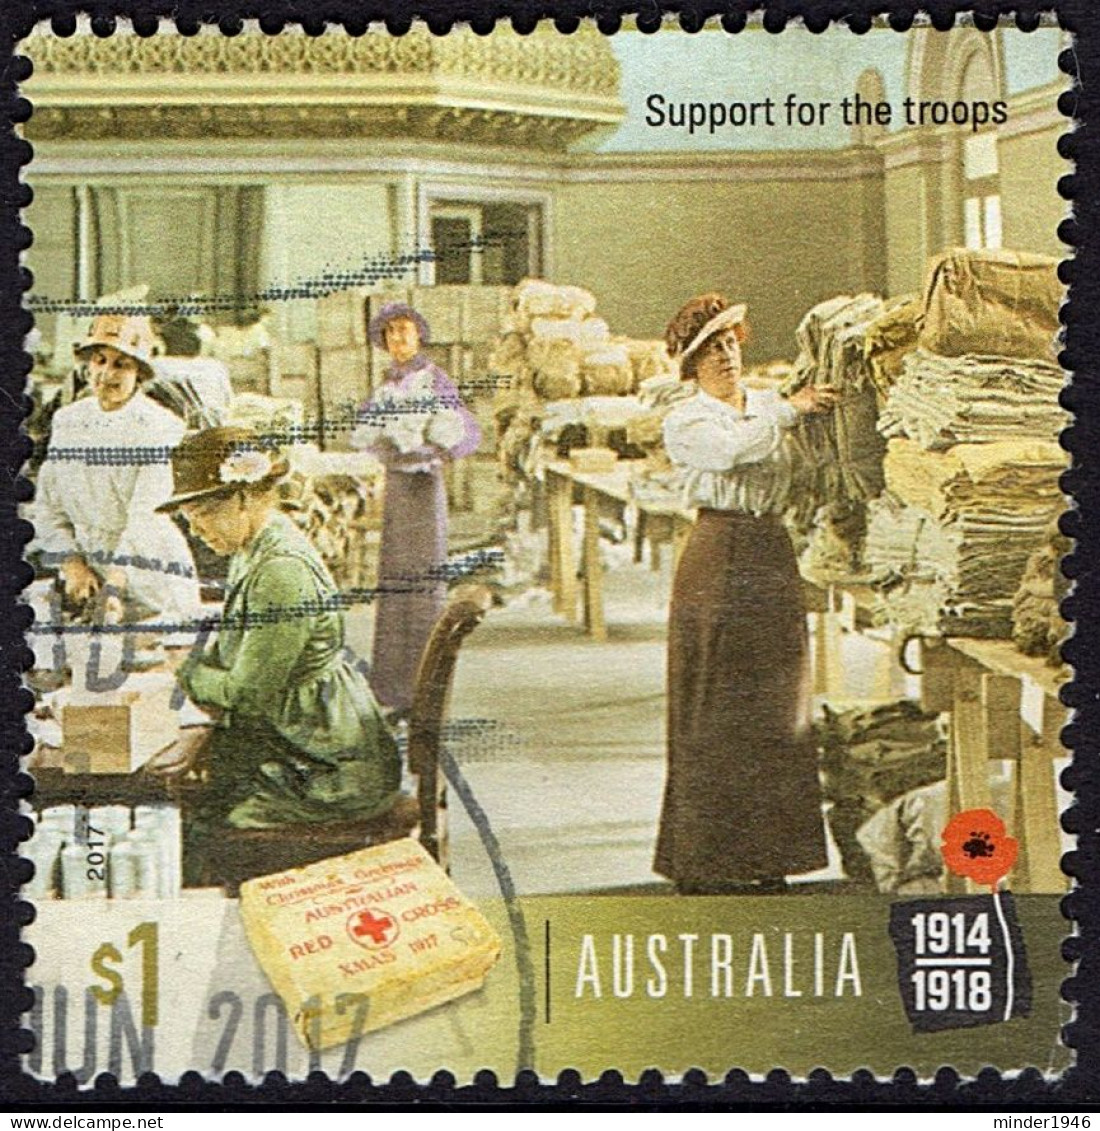 AUSTRALIA 2017 $1 Multicoloured, Centenary Of WWI 1917-Support For The Troops Used - Usati